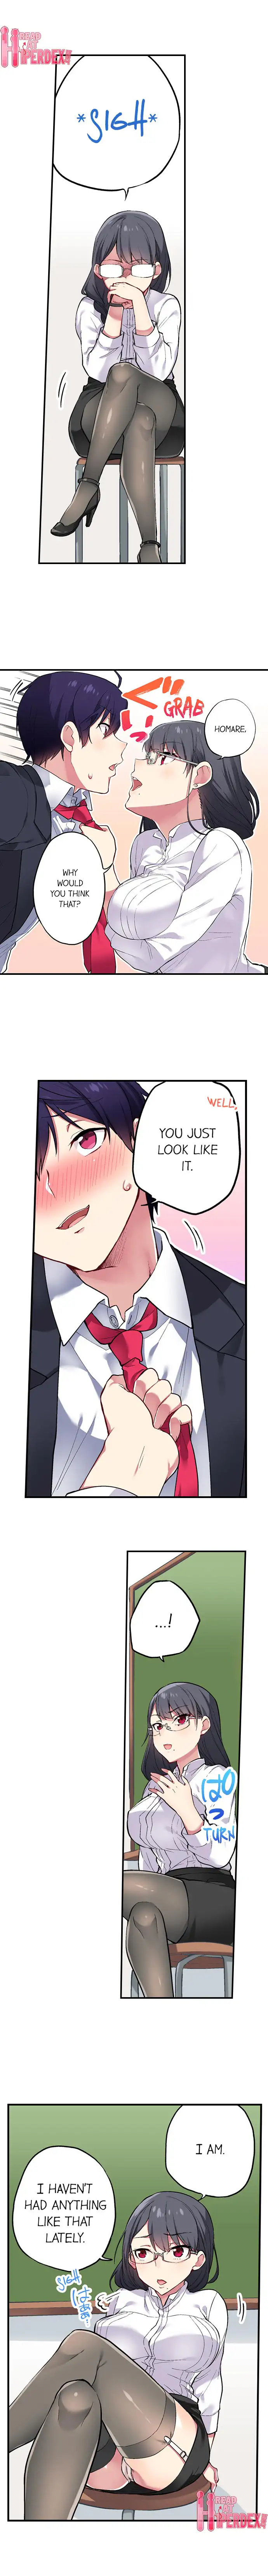 Committee Chairman, Didn’t You Just Masturbate In the Bathroom? I Can See the Number of Times People Orgasm - Chapter 41 Page 2